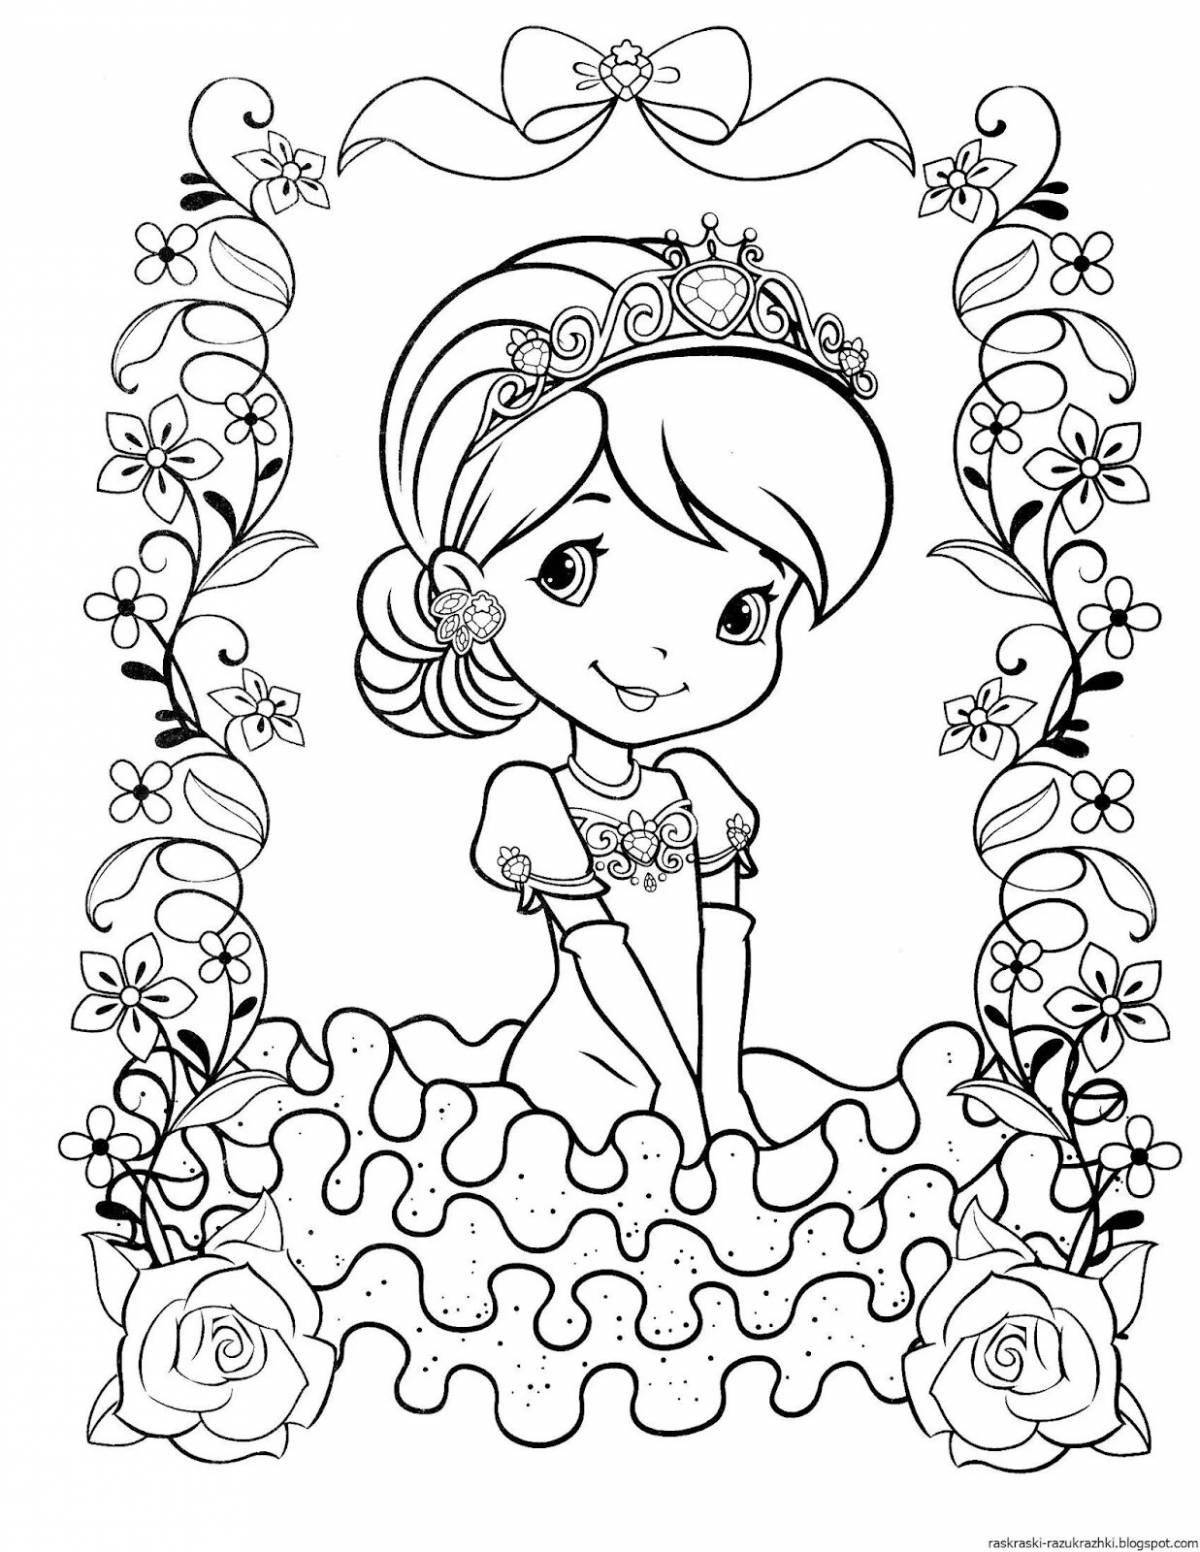 Exquisite coloring book for girls pdf